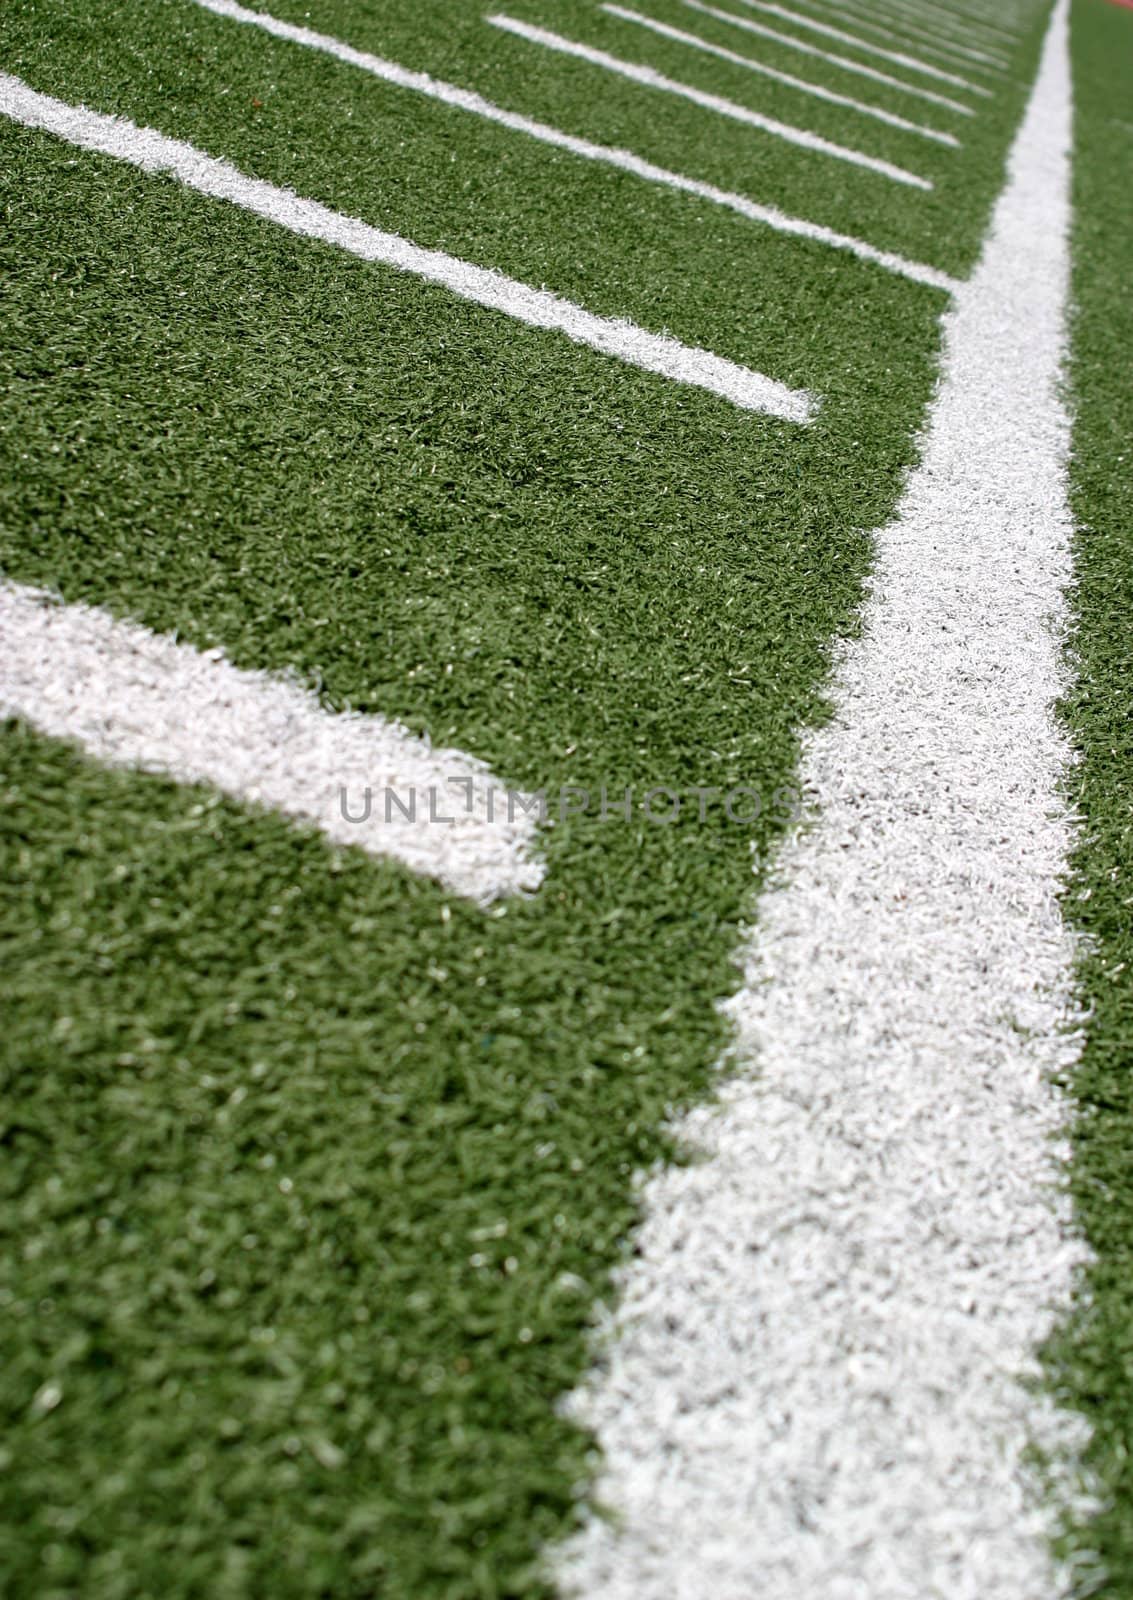 Green football field with large yard markers.